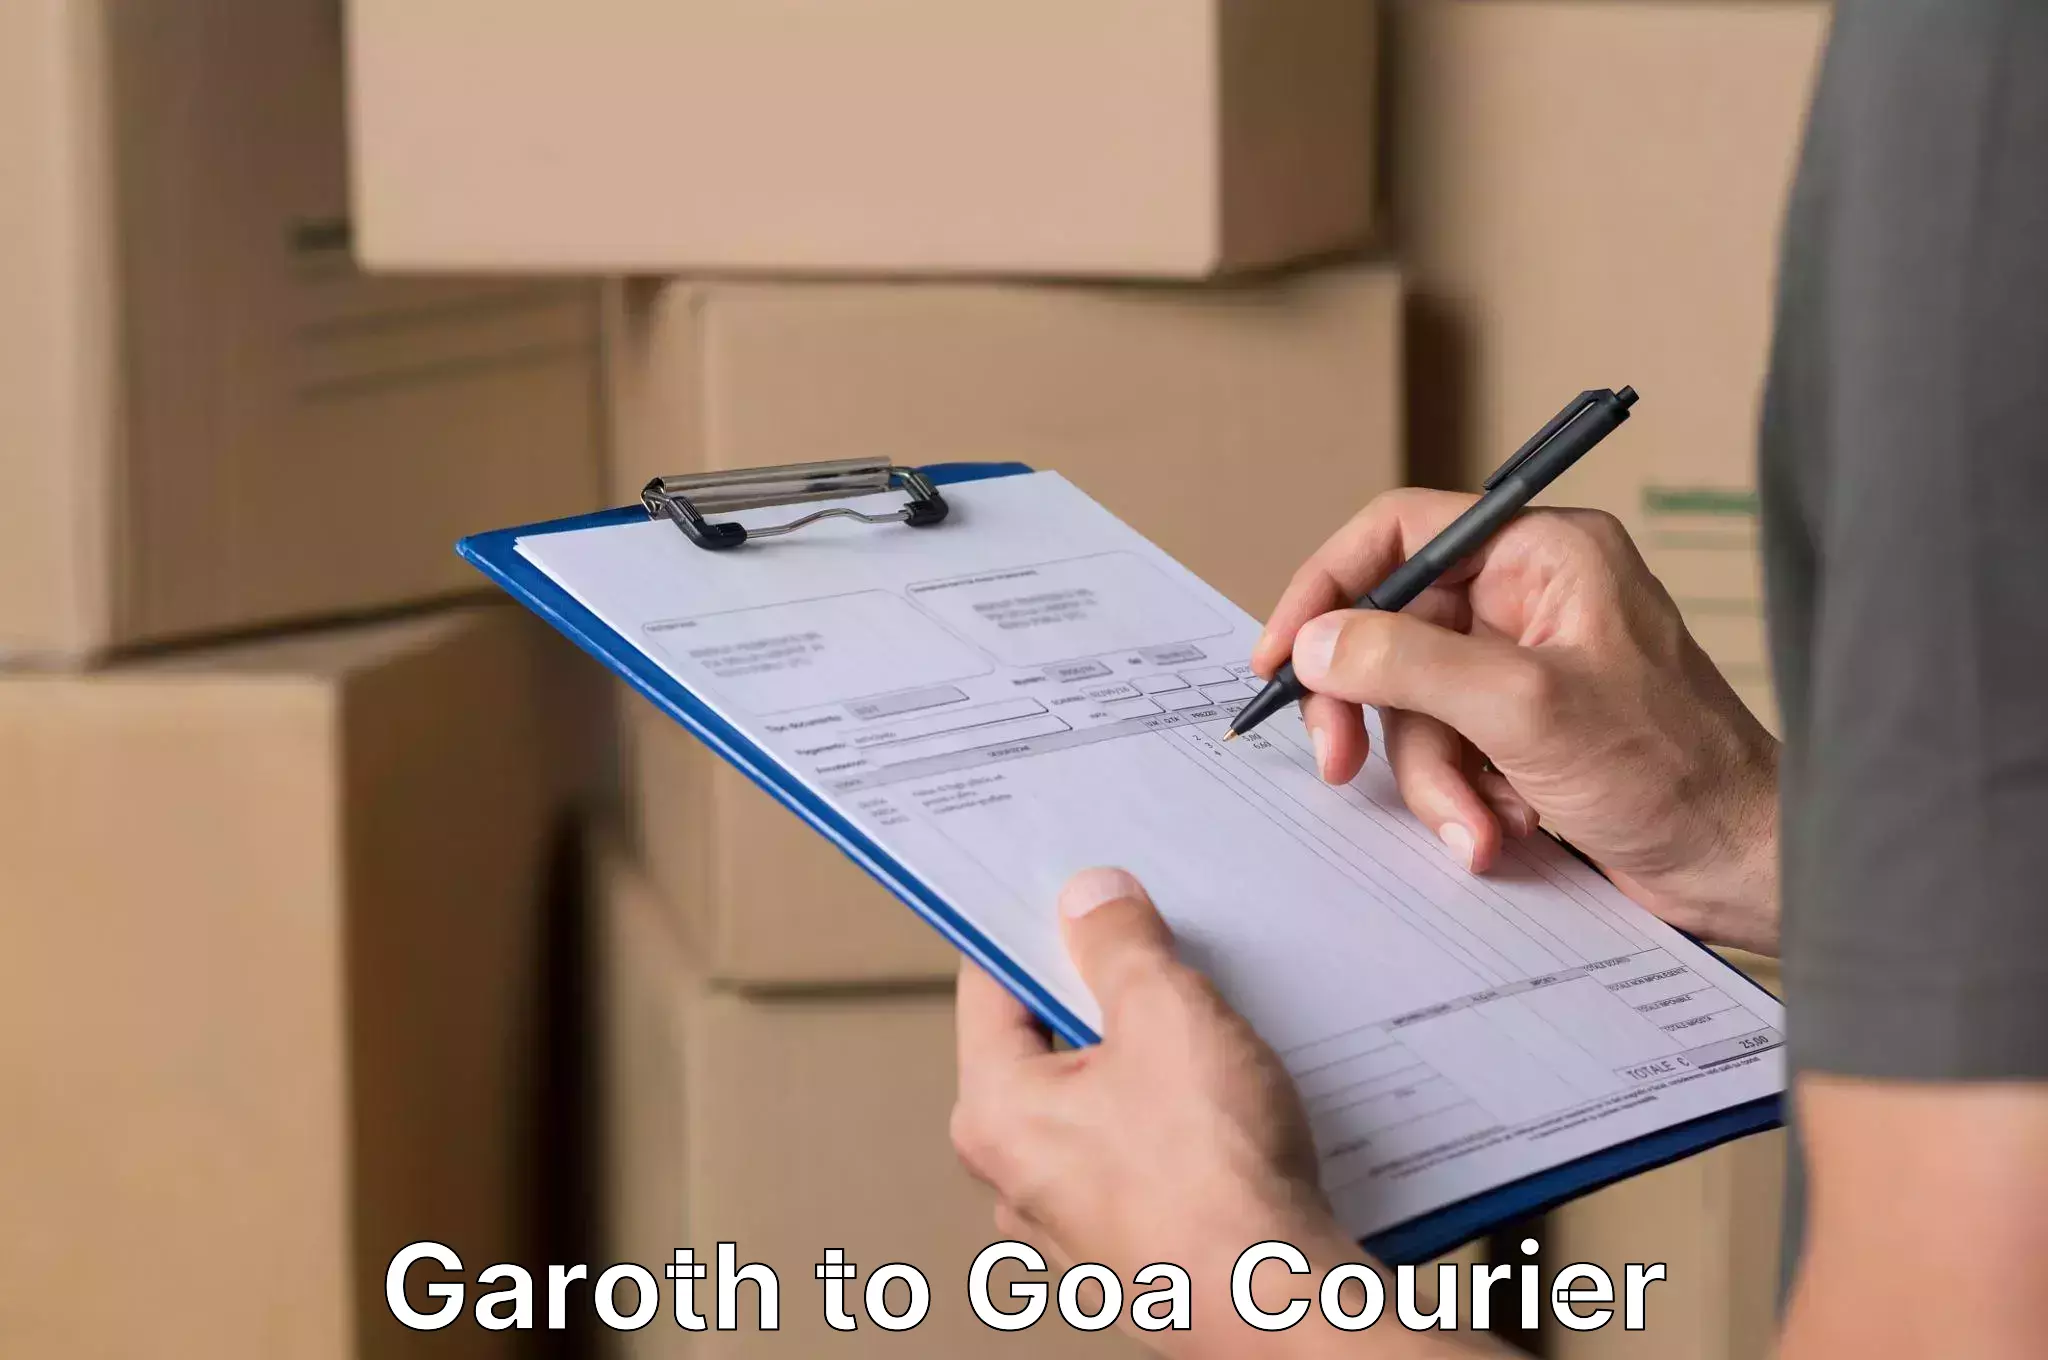 Trusted relocation experts Garoth to Goa